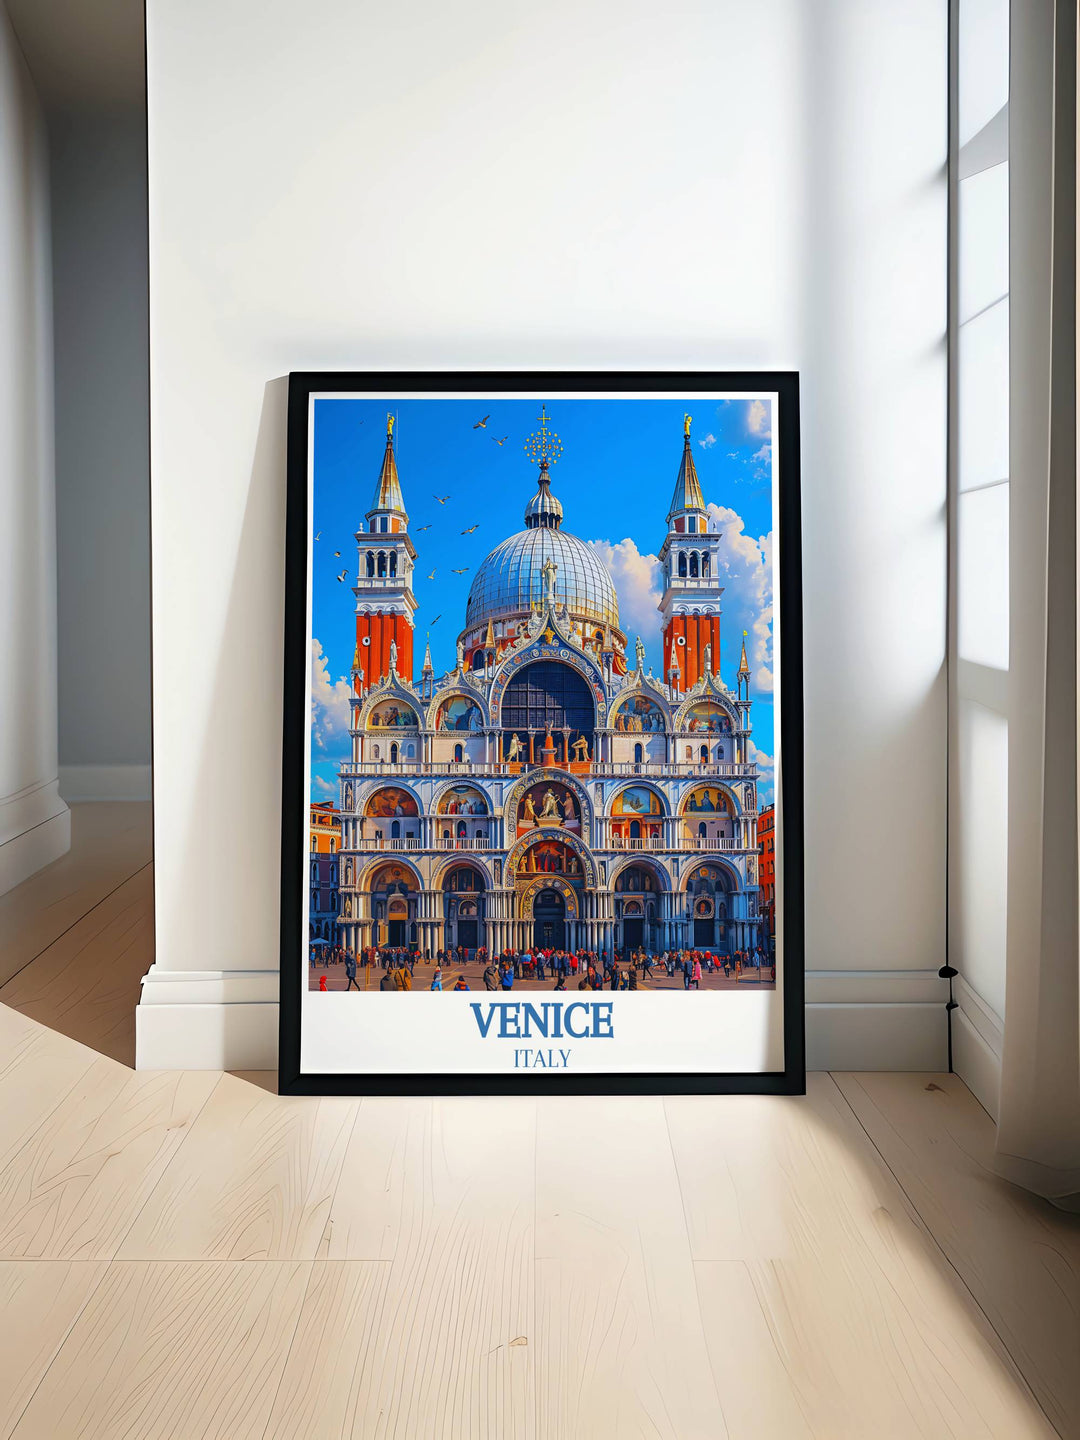 Detailed art print of St. Marks Basilica showcasing the intricate mosaics and majestic domes, capturing the architectural splendor and historical significance of this iconic Venetian landmark, perfect for adding a touch of elegance to any home decor.